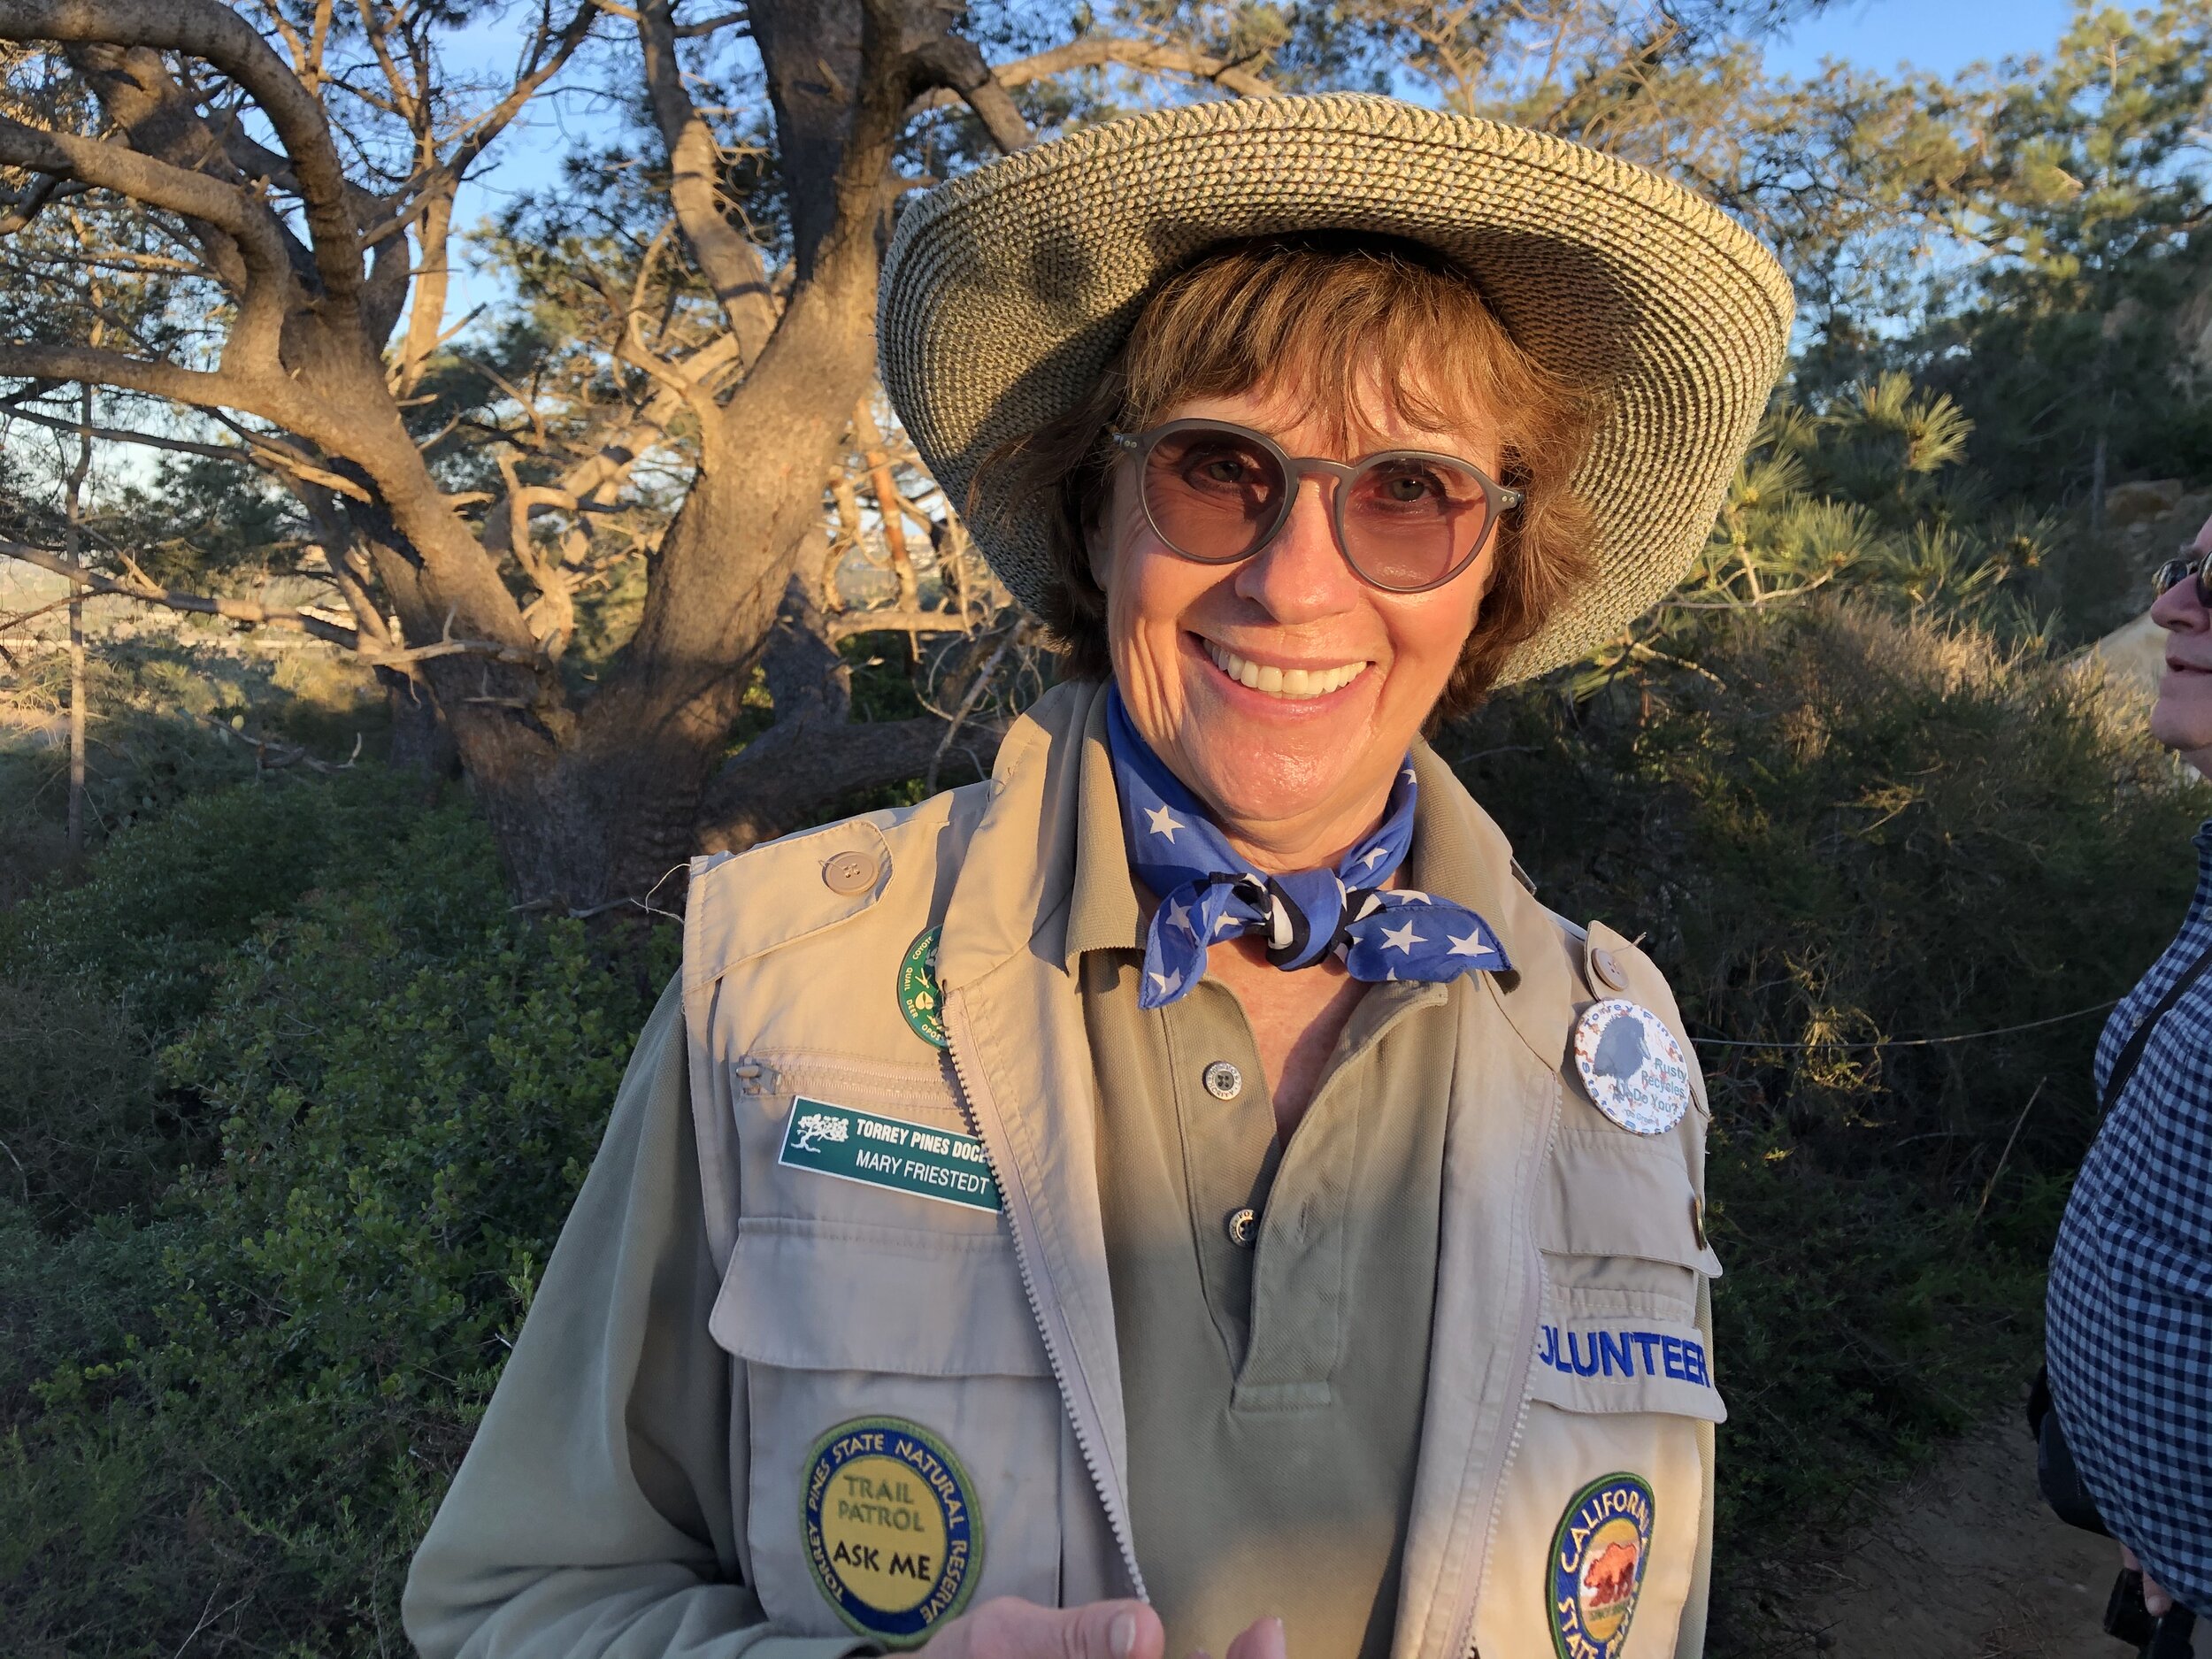 Mary Friestedt - our wonderfully knowledgeable volunteer guide at Torrey Pines State Natural Reserve